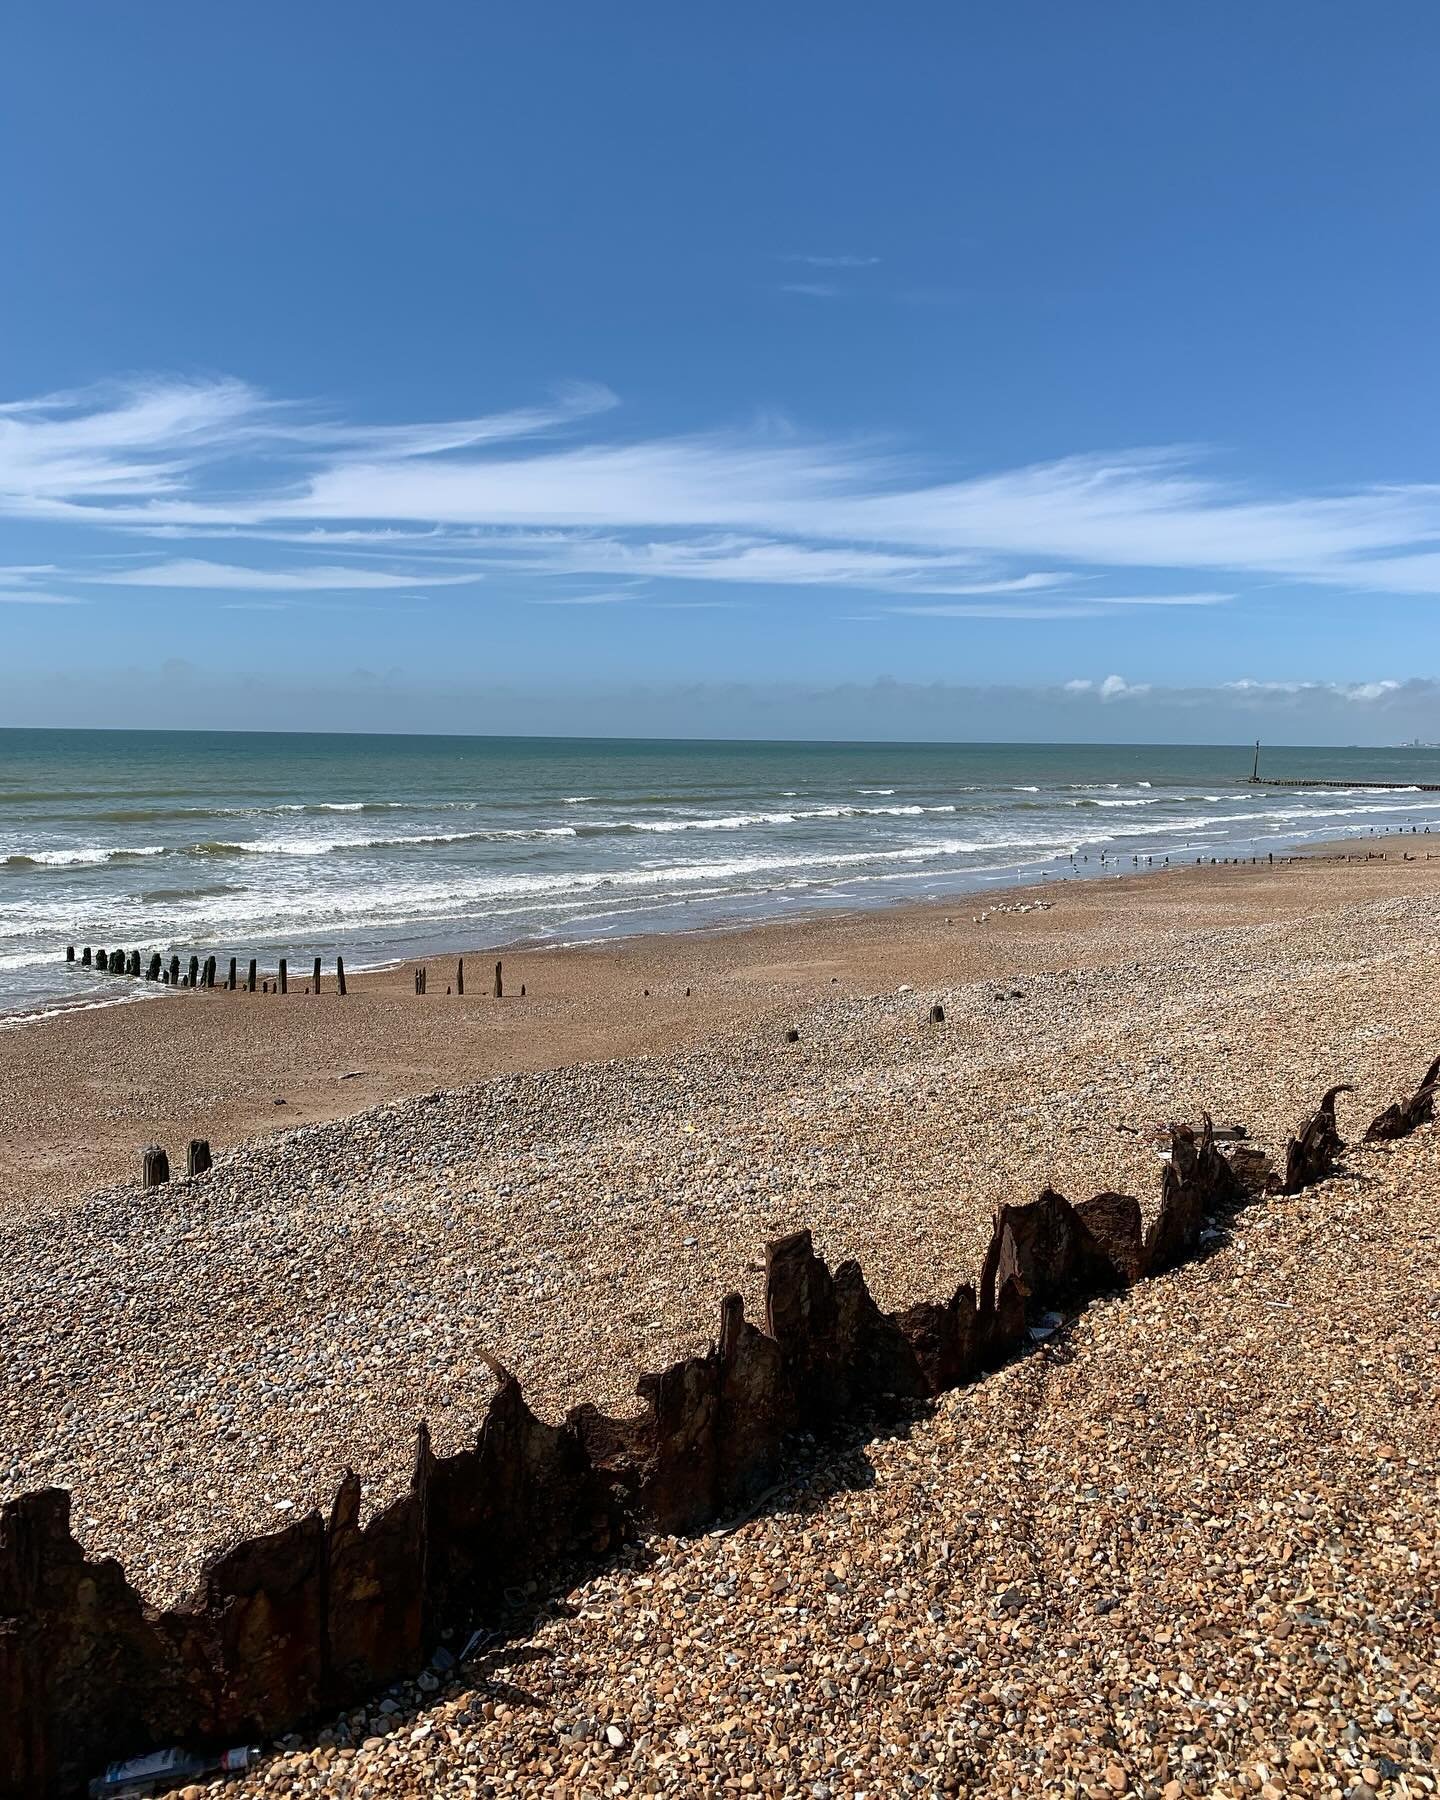 I&rsquo;d pretty much class this as best weather ever for a bike ride/  birthday lunch @crabshack_worthing scenario - thank you weather 🤩 🚲

Excellent lunch too! 😍